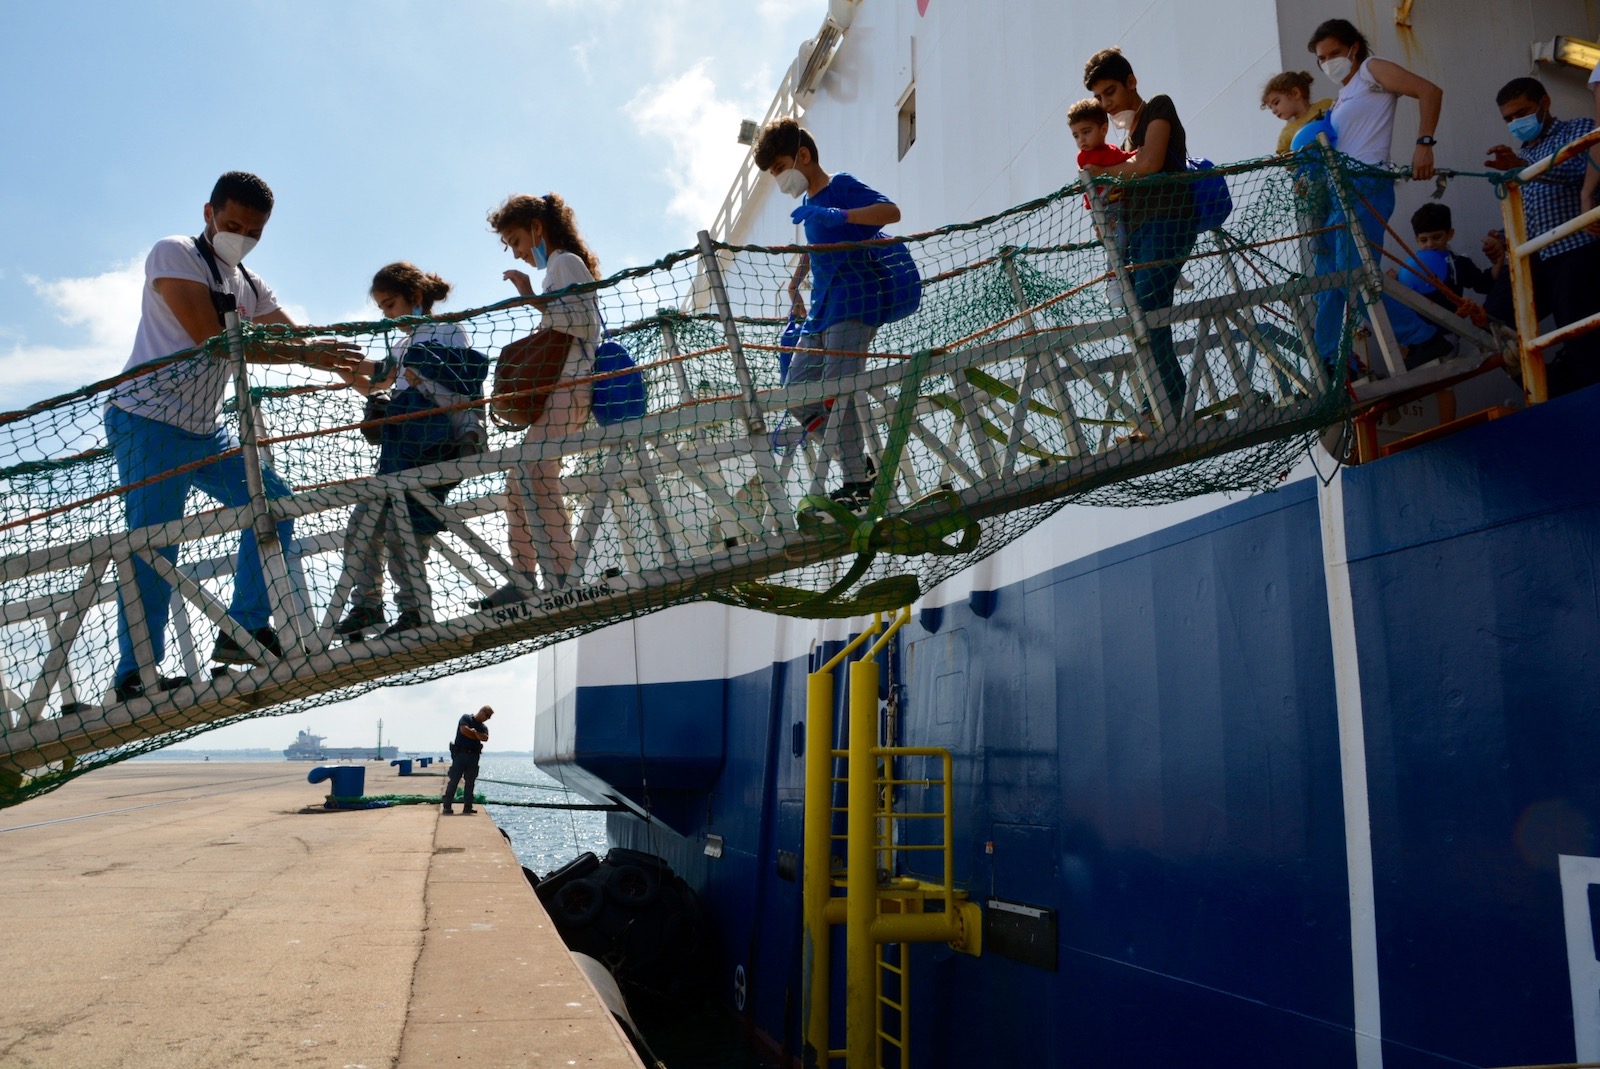 A row of people, including children, descending a plank off a ship